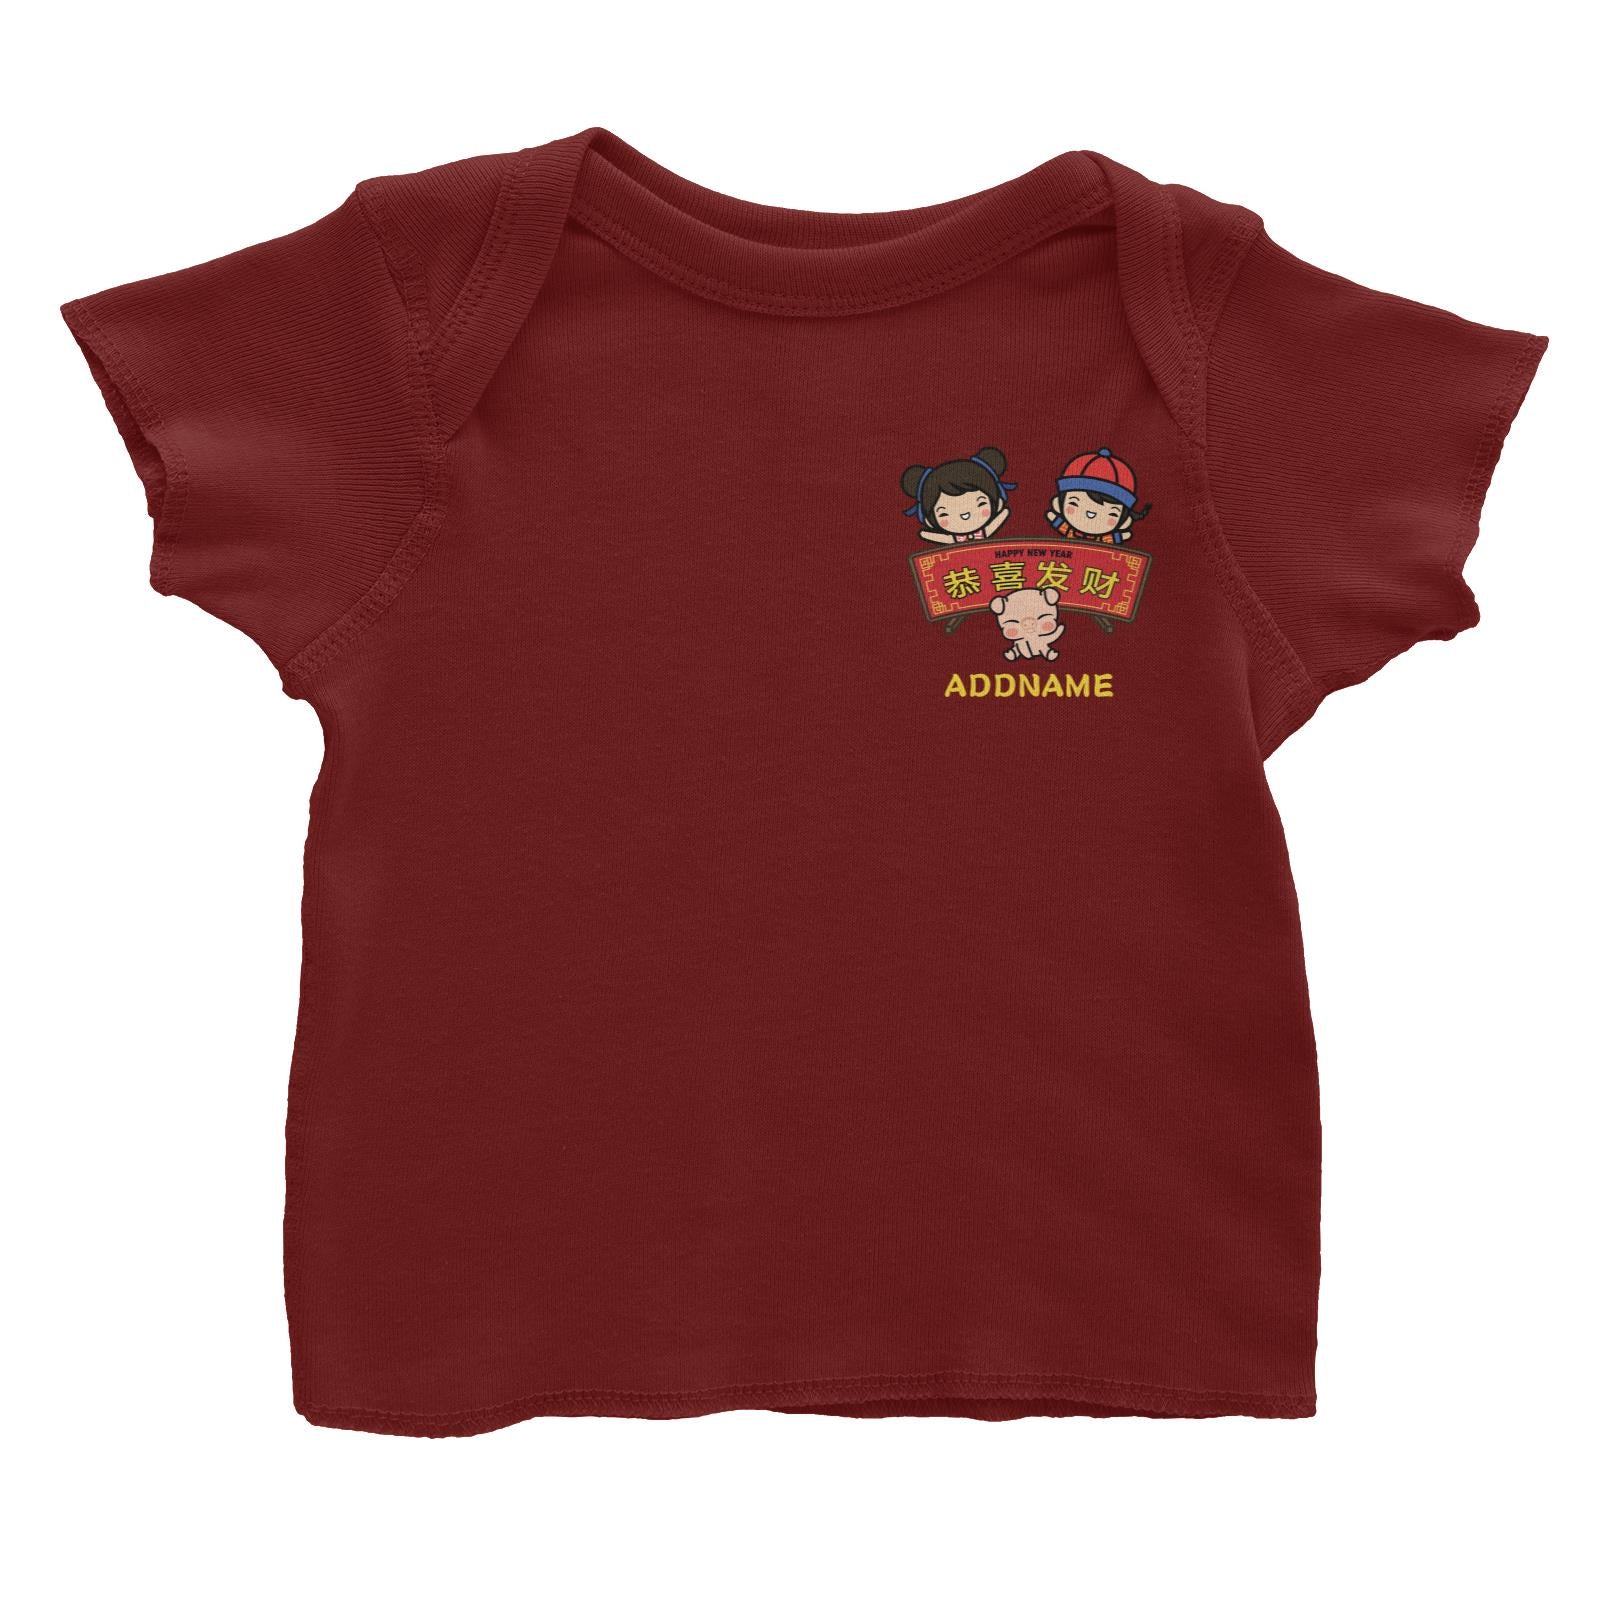 Prosperity Pig Boy, Girl And Baby Pig with Signage Pocket Design Baby T-Shirt